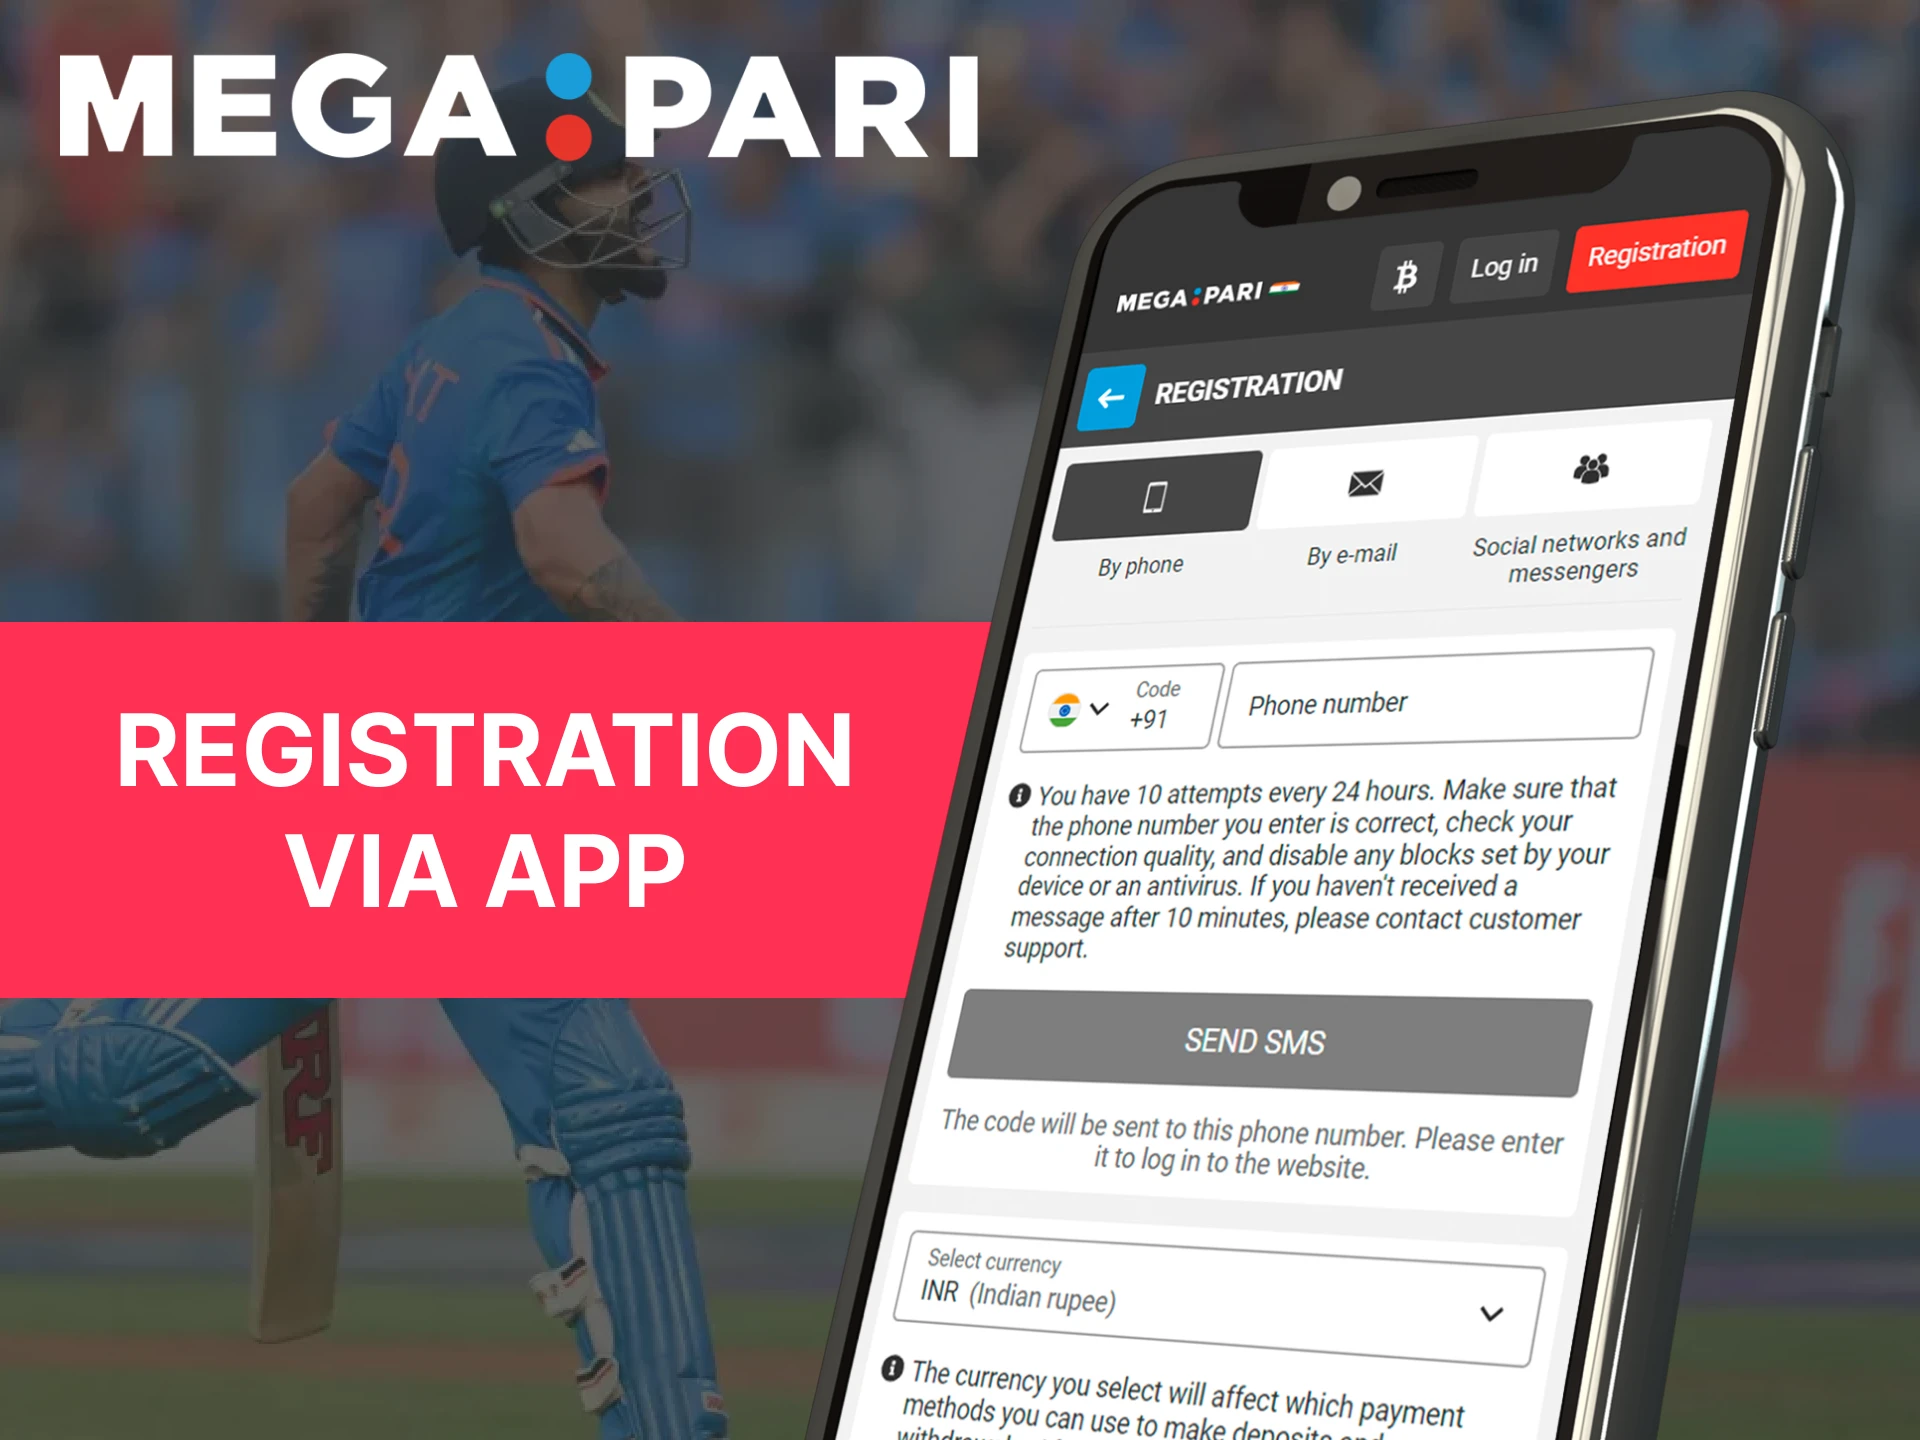 Download the Megapari mobile app and register directly from the app.